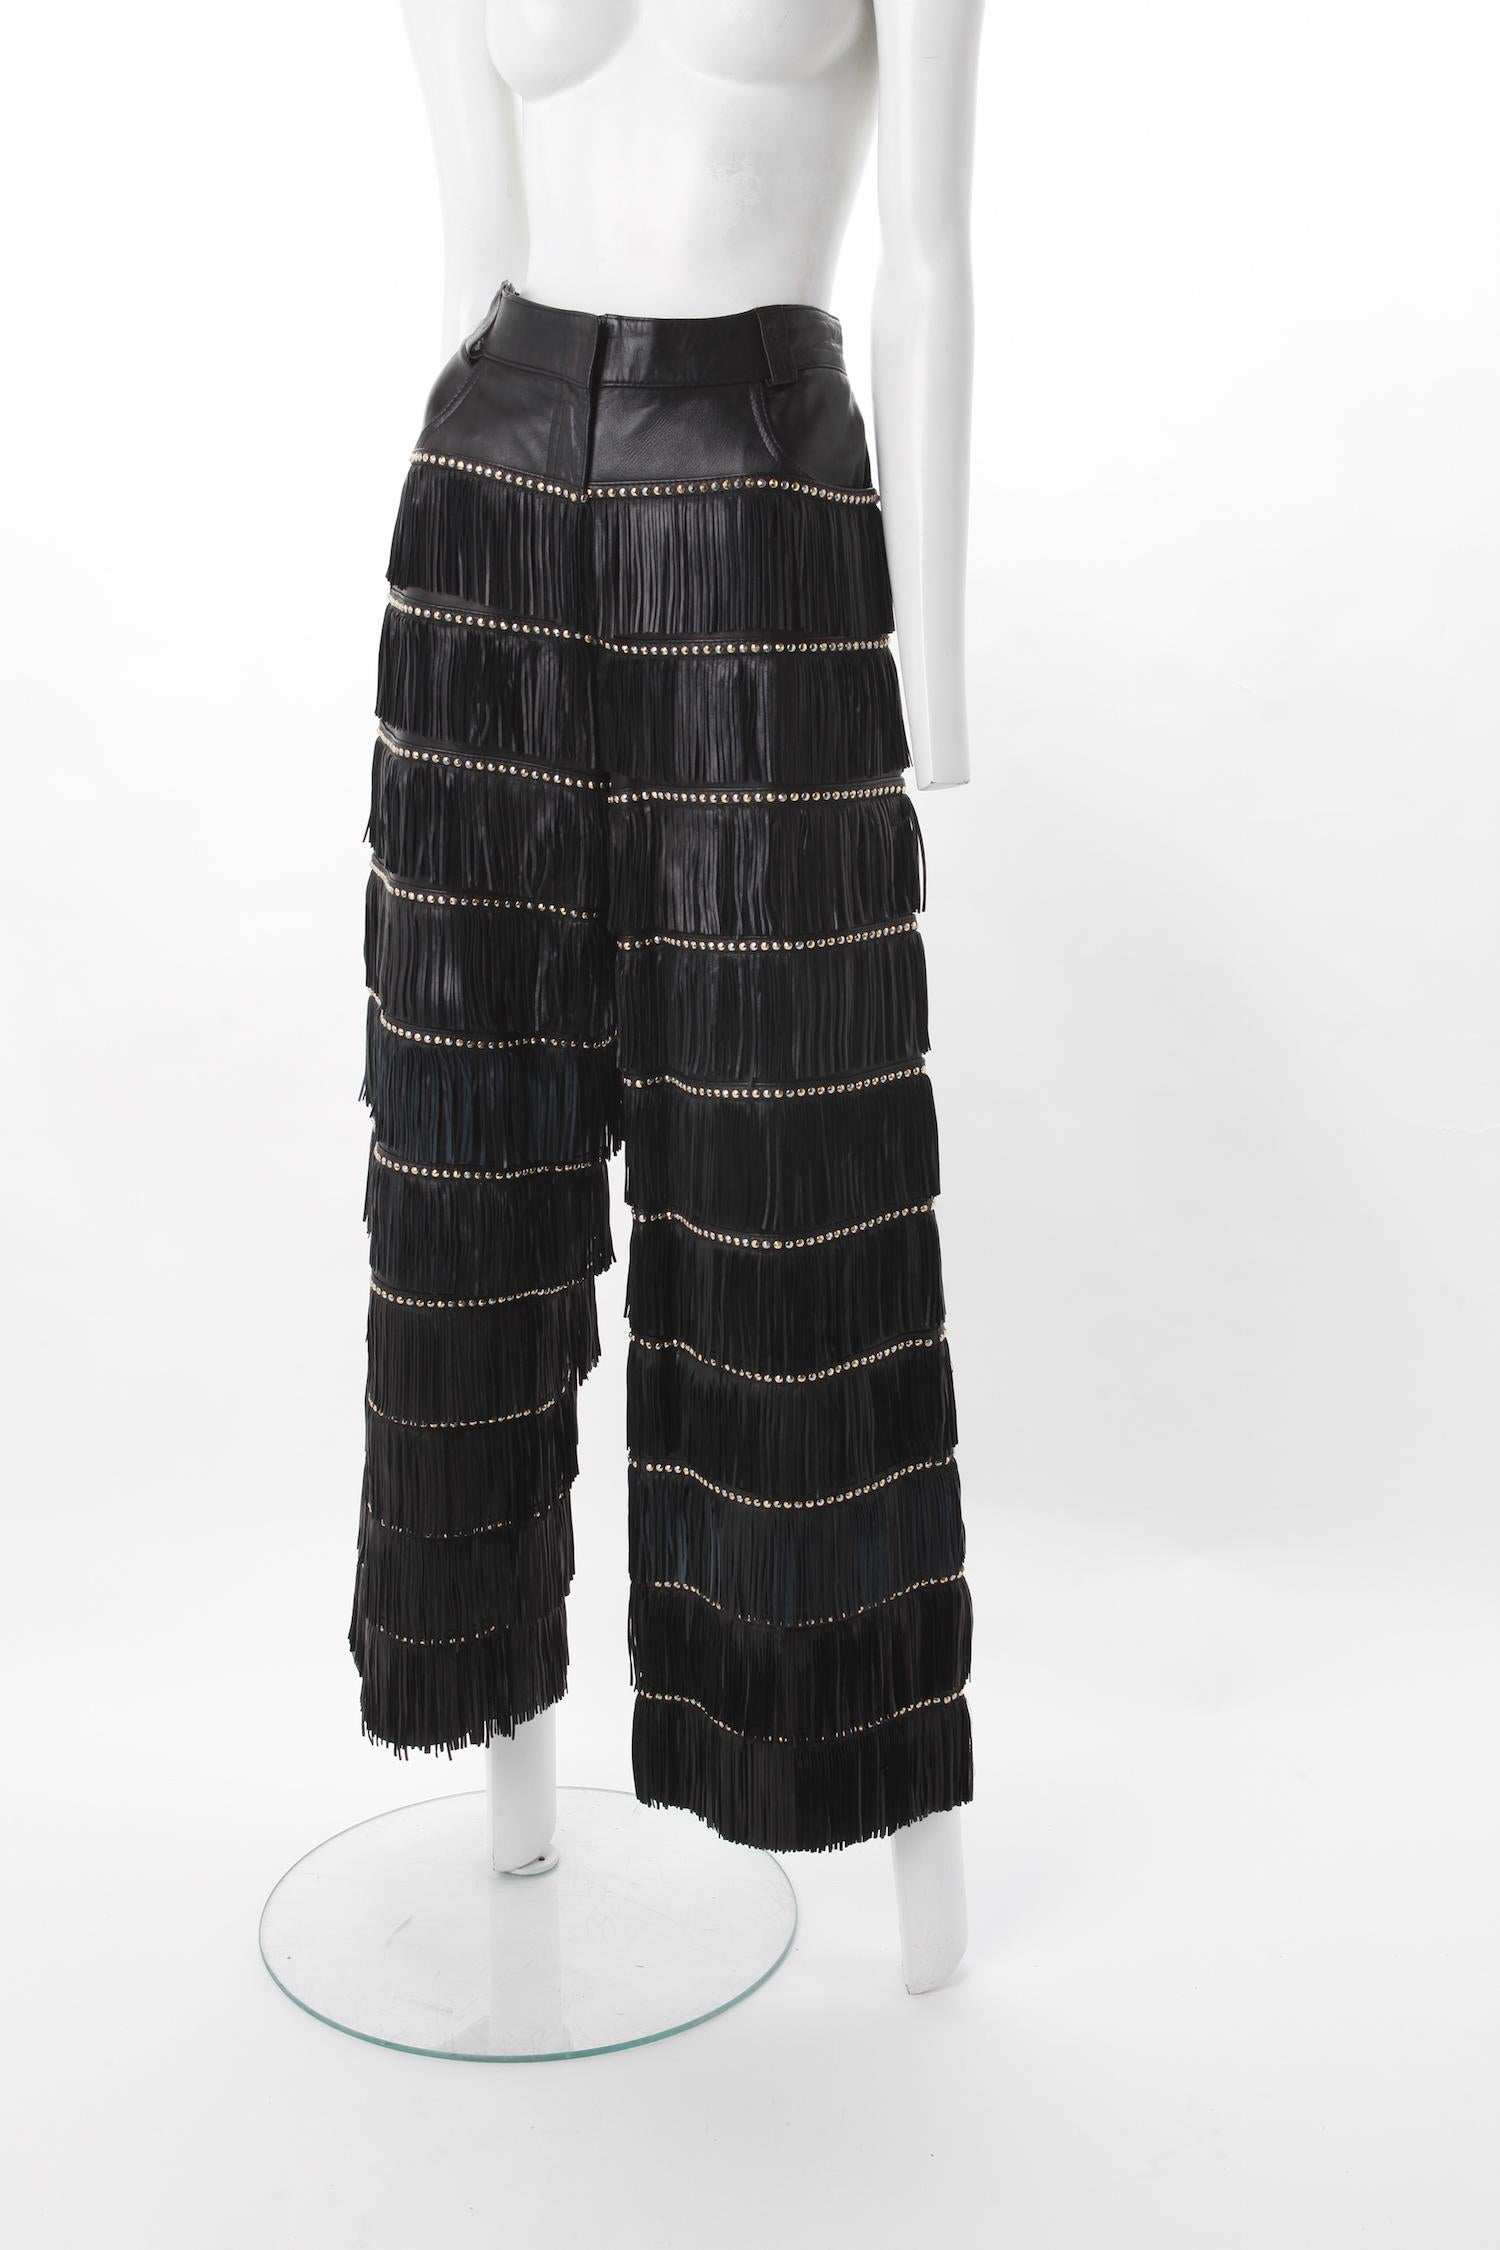 Gianni Versace Fringe Leather Pants,  F/W 1992.
Documented Gianni Versace black leather fringe pants with studded accents. Fall/Winter 1992 
Front slant pockets and Zip front with hook and eye closure.
Features silver and gold tone hardware.
Size